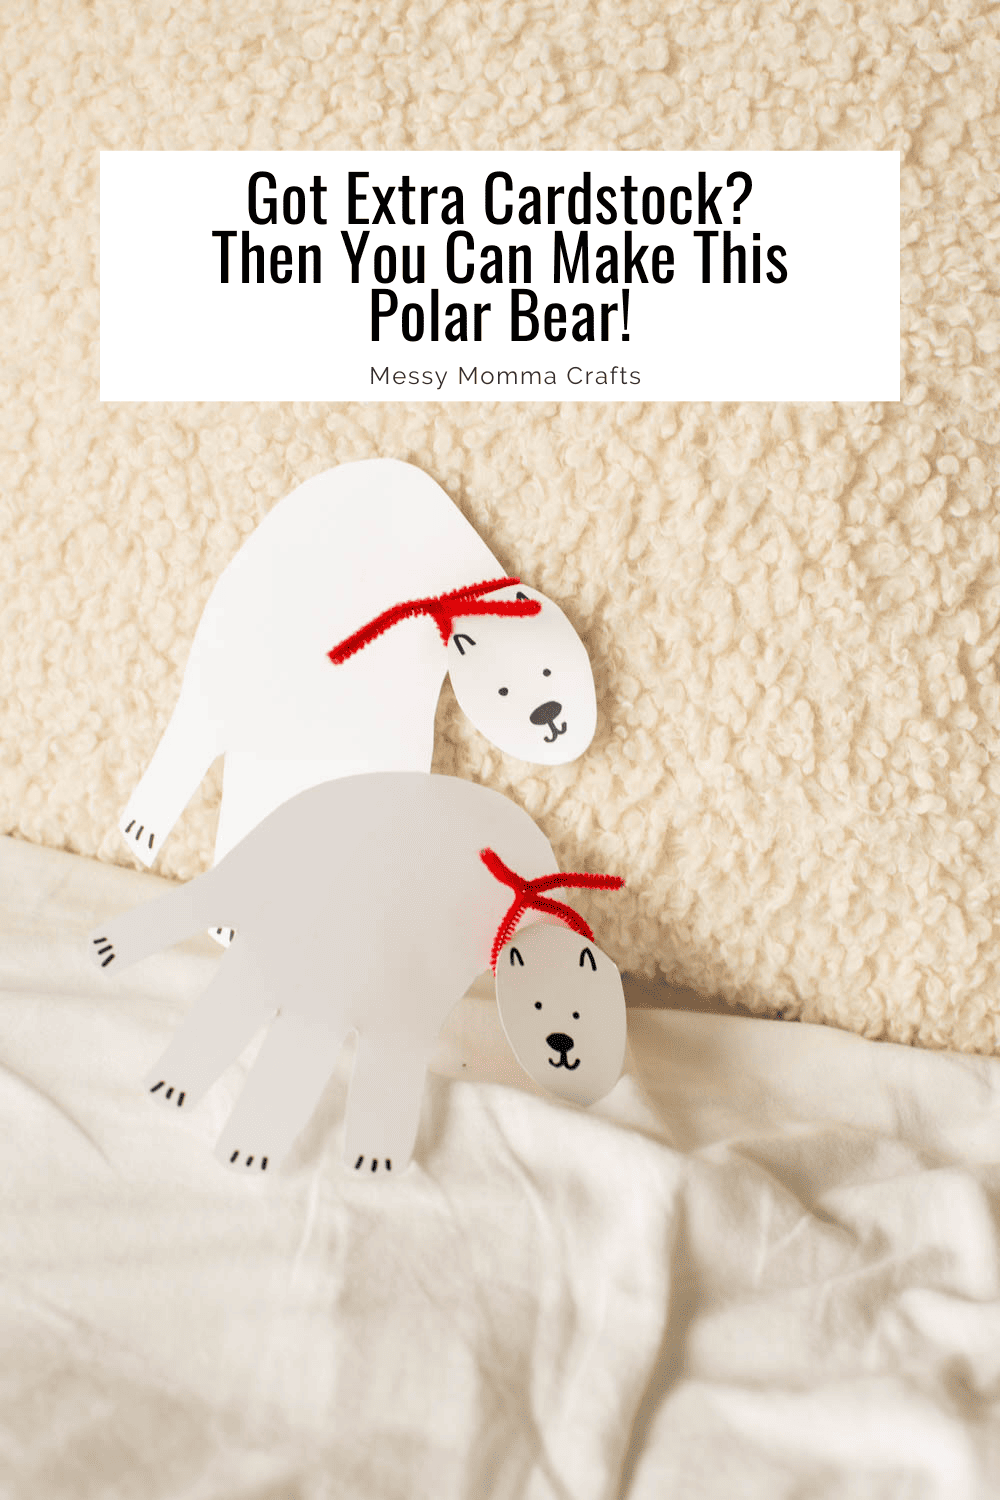 Two cardstock polar bears lean on a sherpa pillow